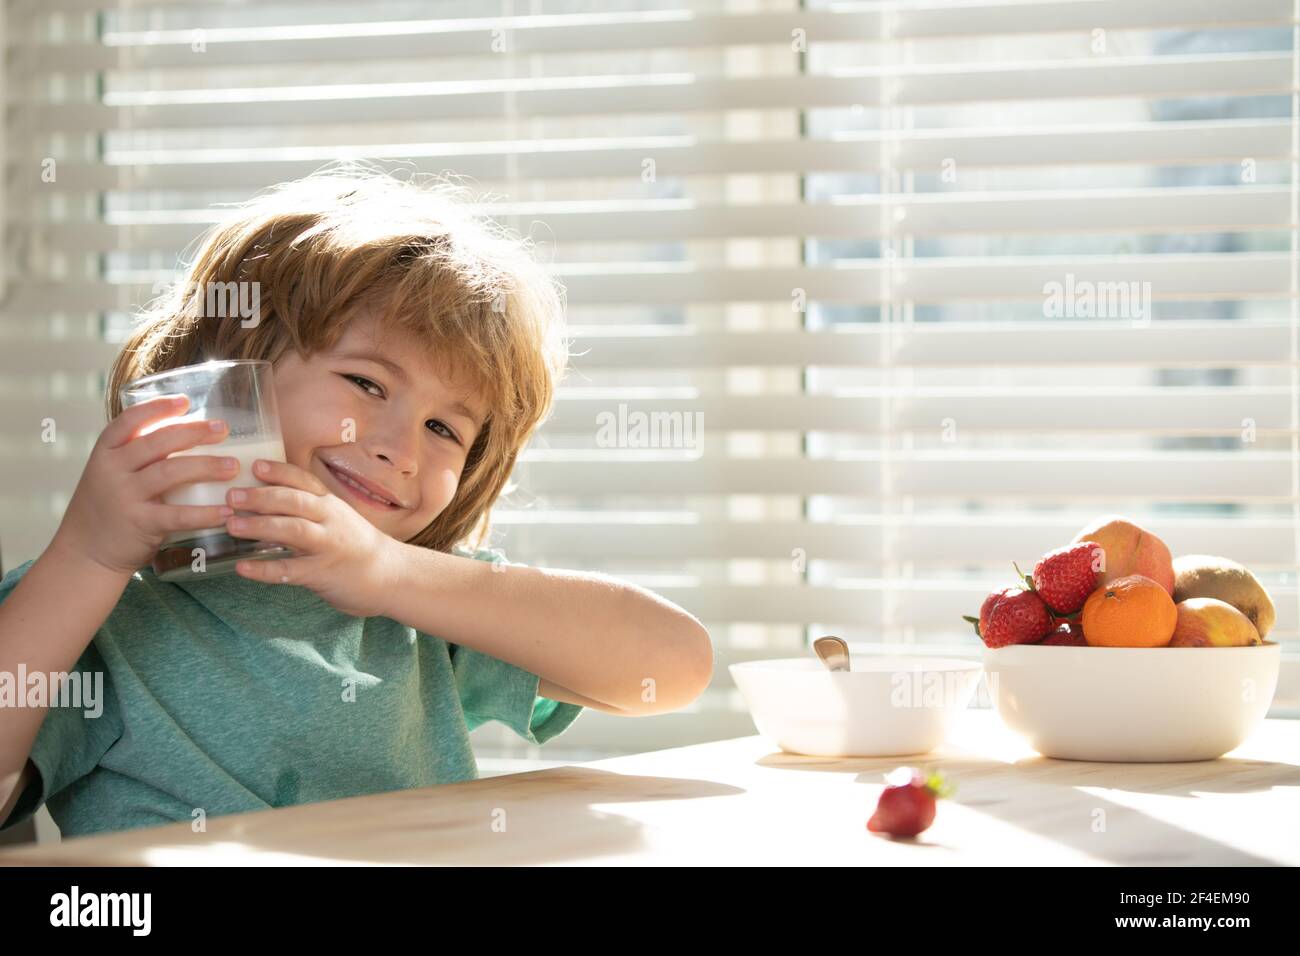 Kid eating breakfast. Child eating healthy food. Healthy nutrition for kids. Stock Photo